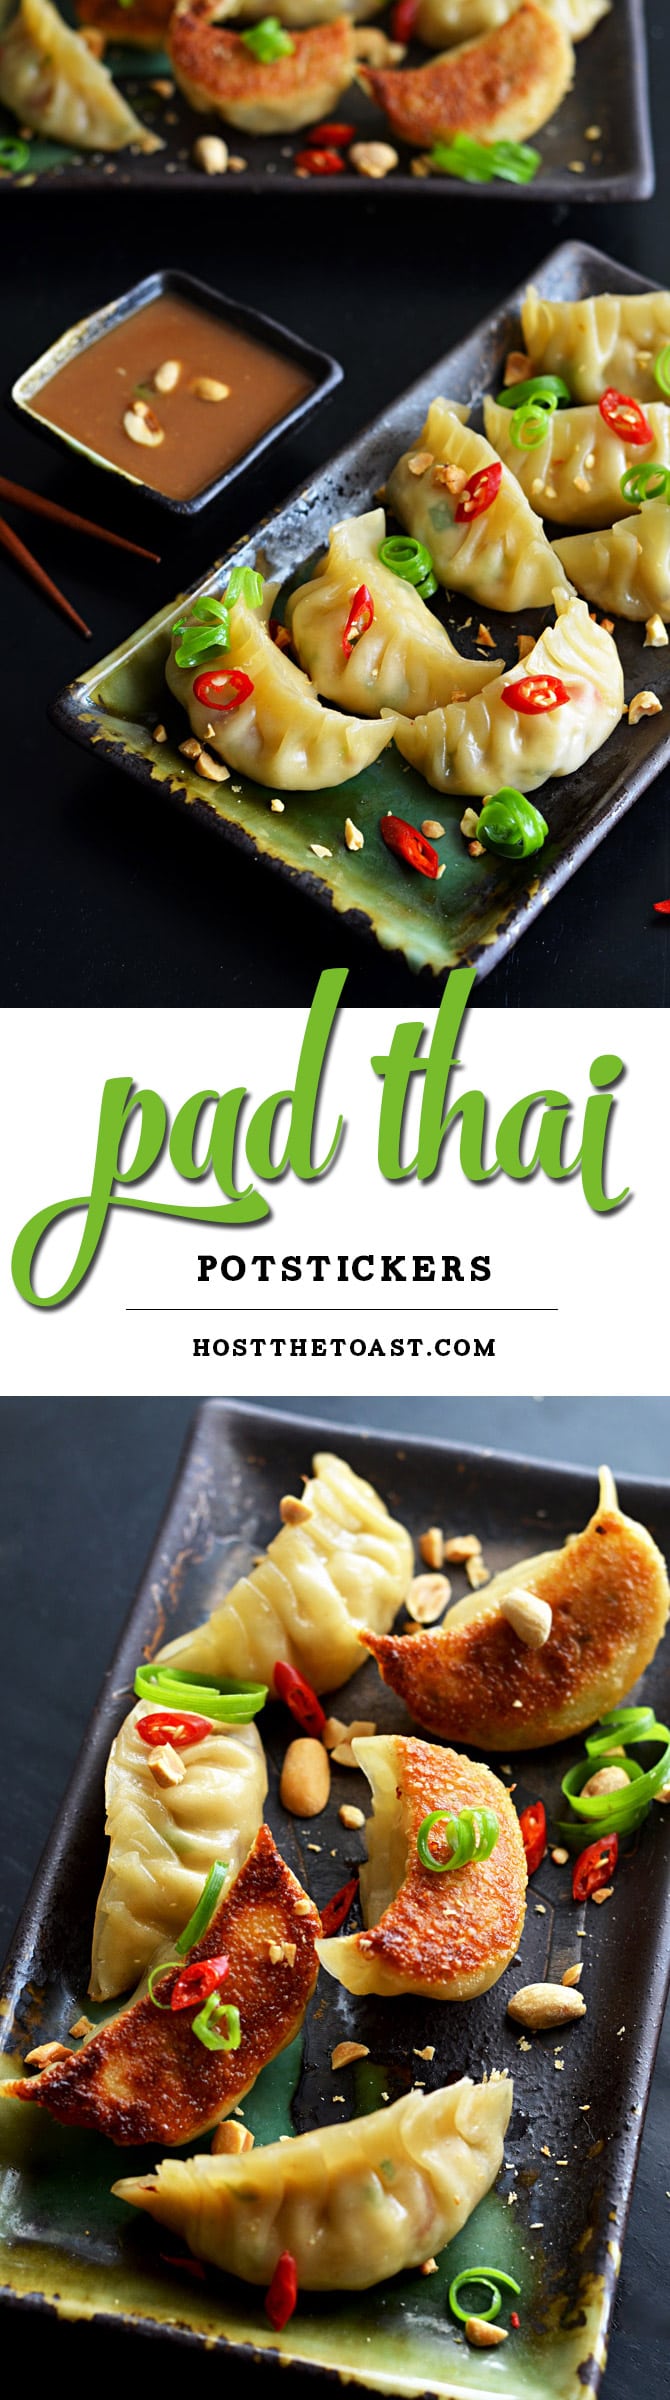 Pad Thai Potstickers. Turn the foreign food favorite into a delicious (and freezer-friendly) appetizer. | hostthetoast.com